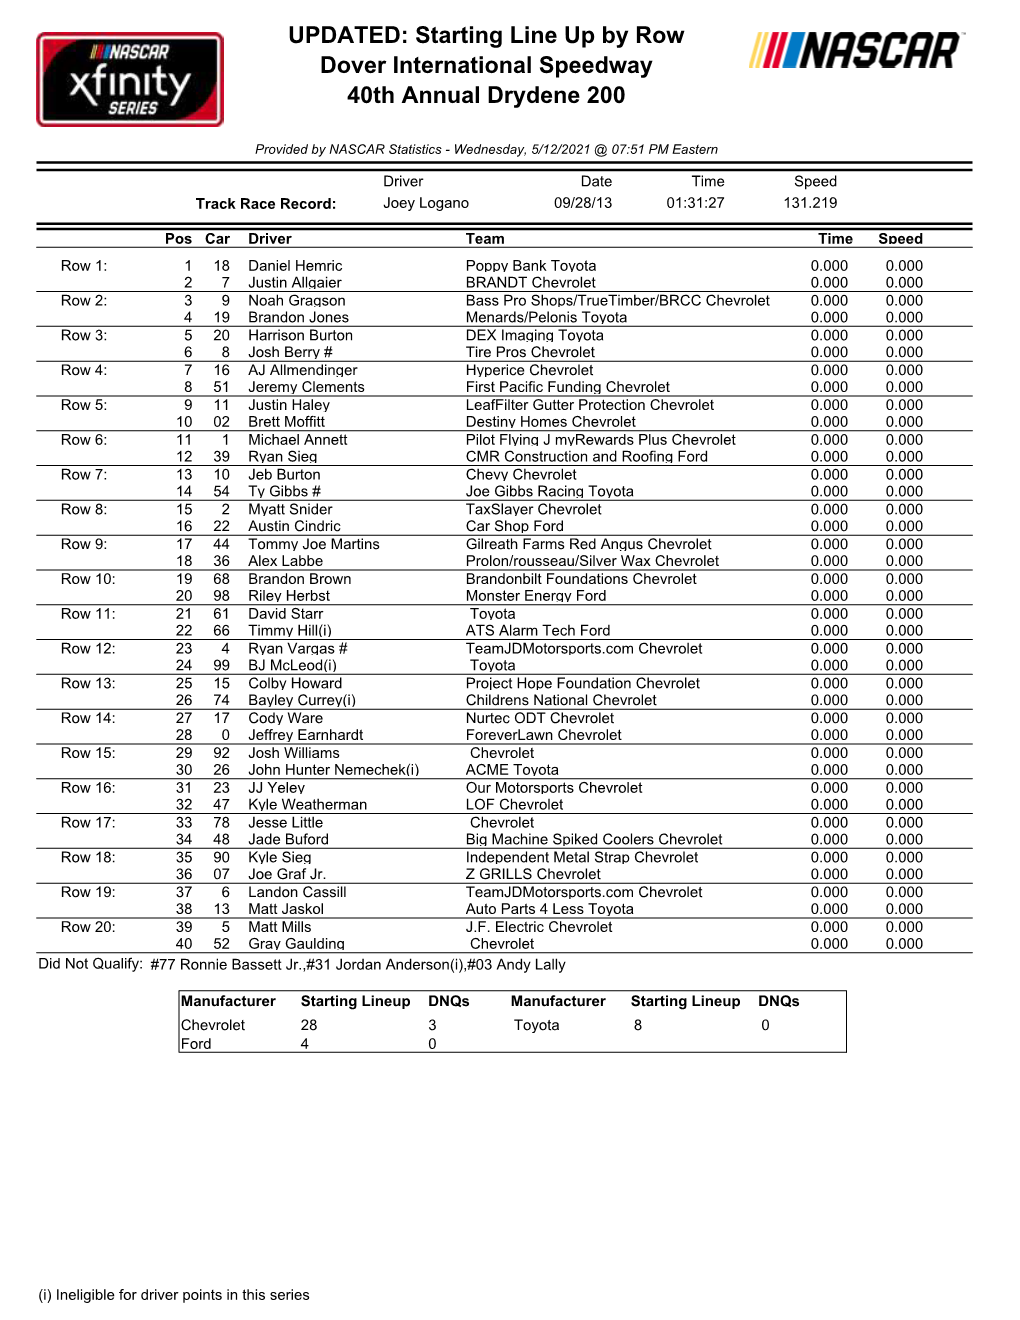 UPDATED: Starting Line up by Row Dover International Speedway 40Th Annual Drydene 200